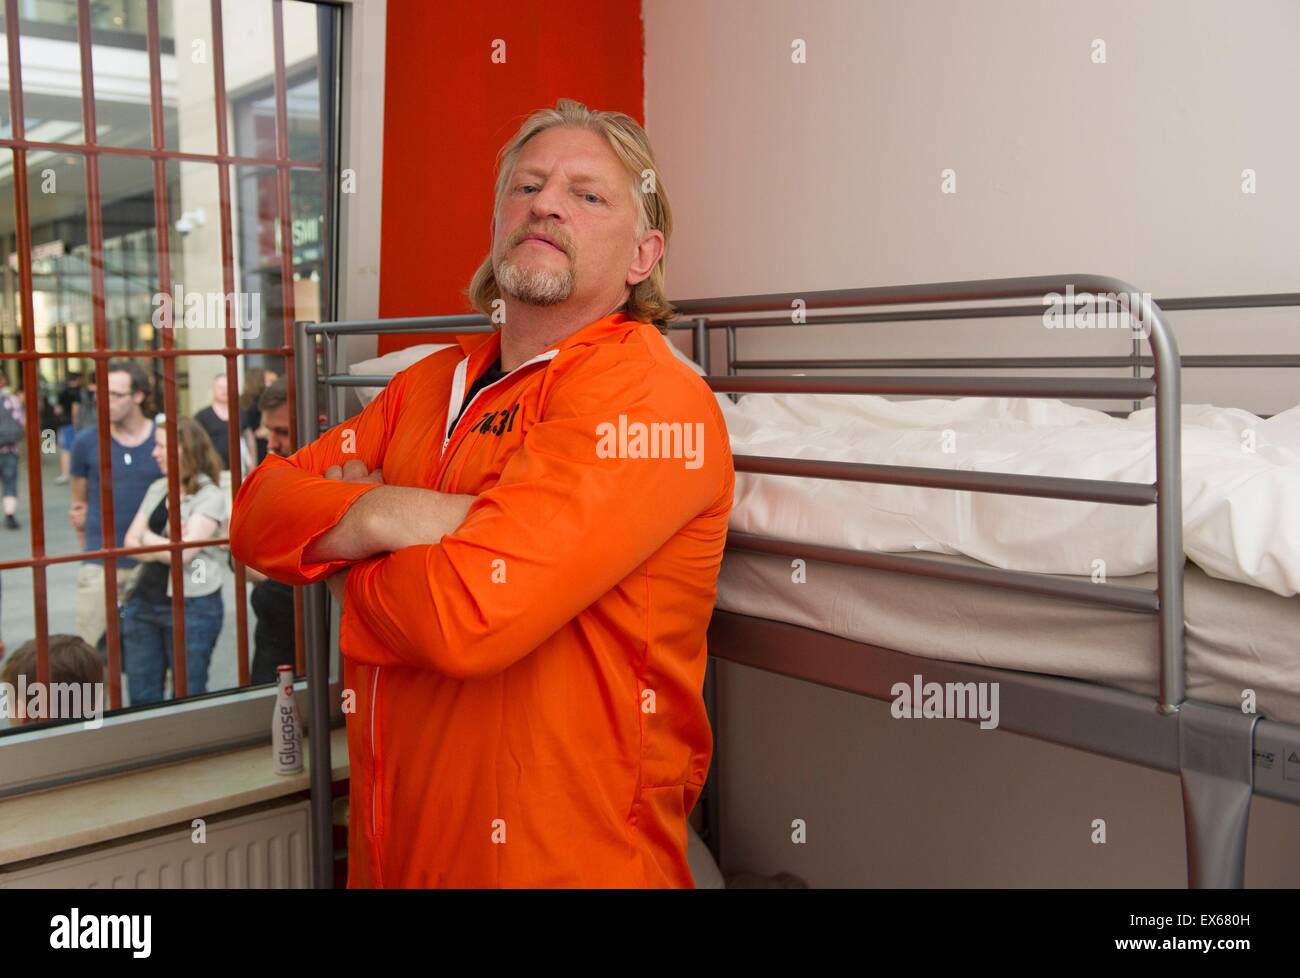 Berlin, Germany. 07th July, 2015. German actor Frank Kessler poses in a 'jail container' inside a mall in Berlin, Germany, 07 July 2015. The actor promotes the US series 'Orange Is the New Black' that is broadcasted on Netflix via streaming since 2013 in the US. Photo: Paul Zinken/dpa/Alamy Live News Stock Photo